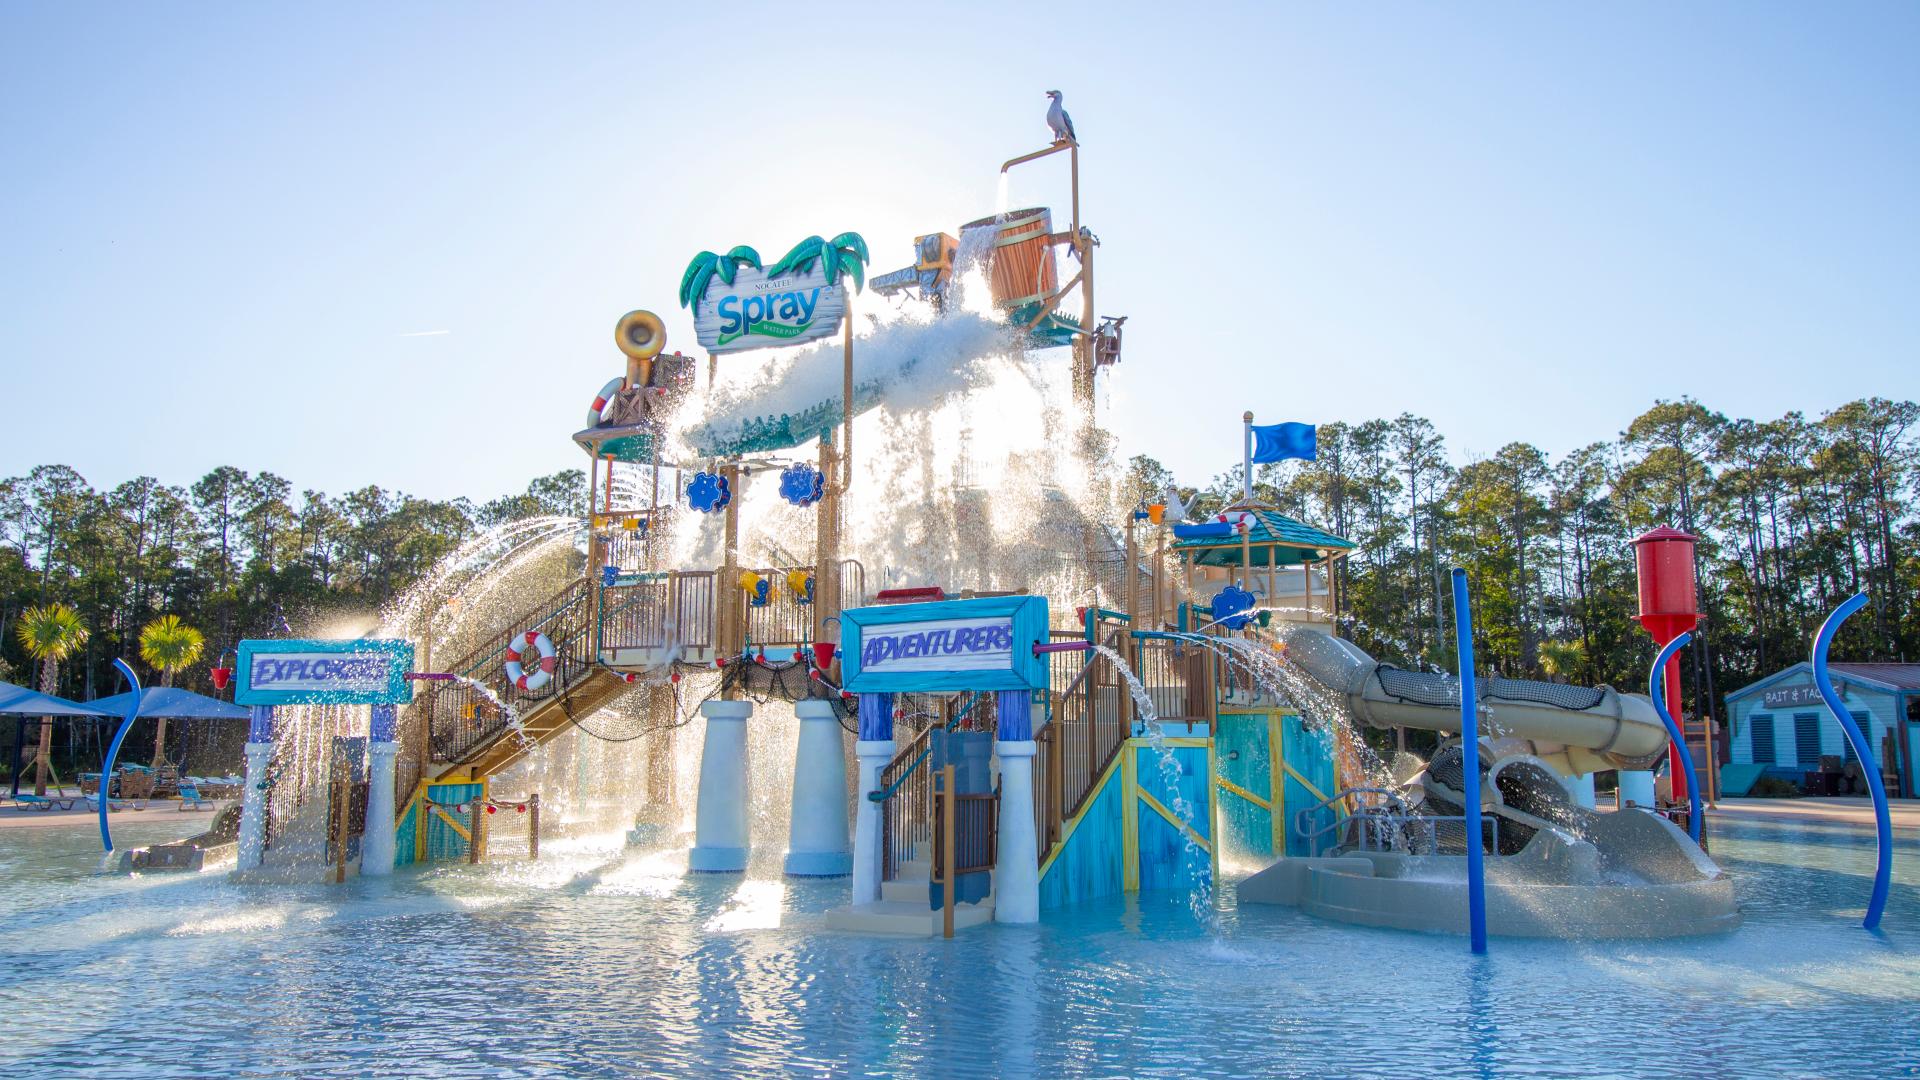 Cool off at the Nocatee Spray Water Park